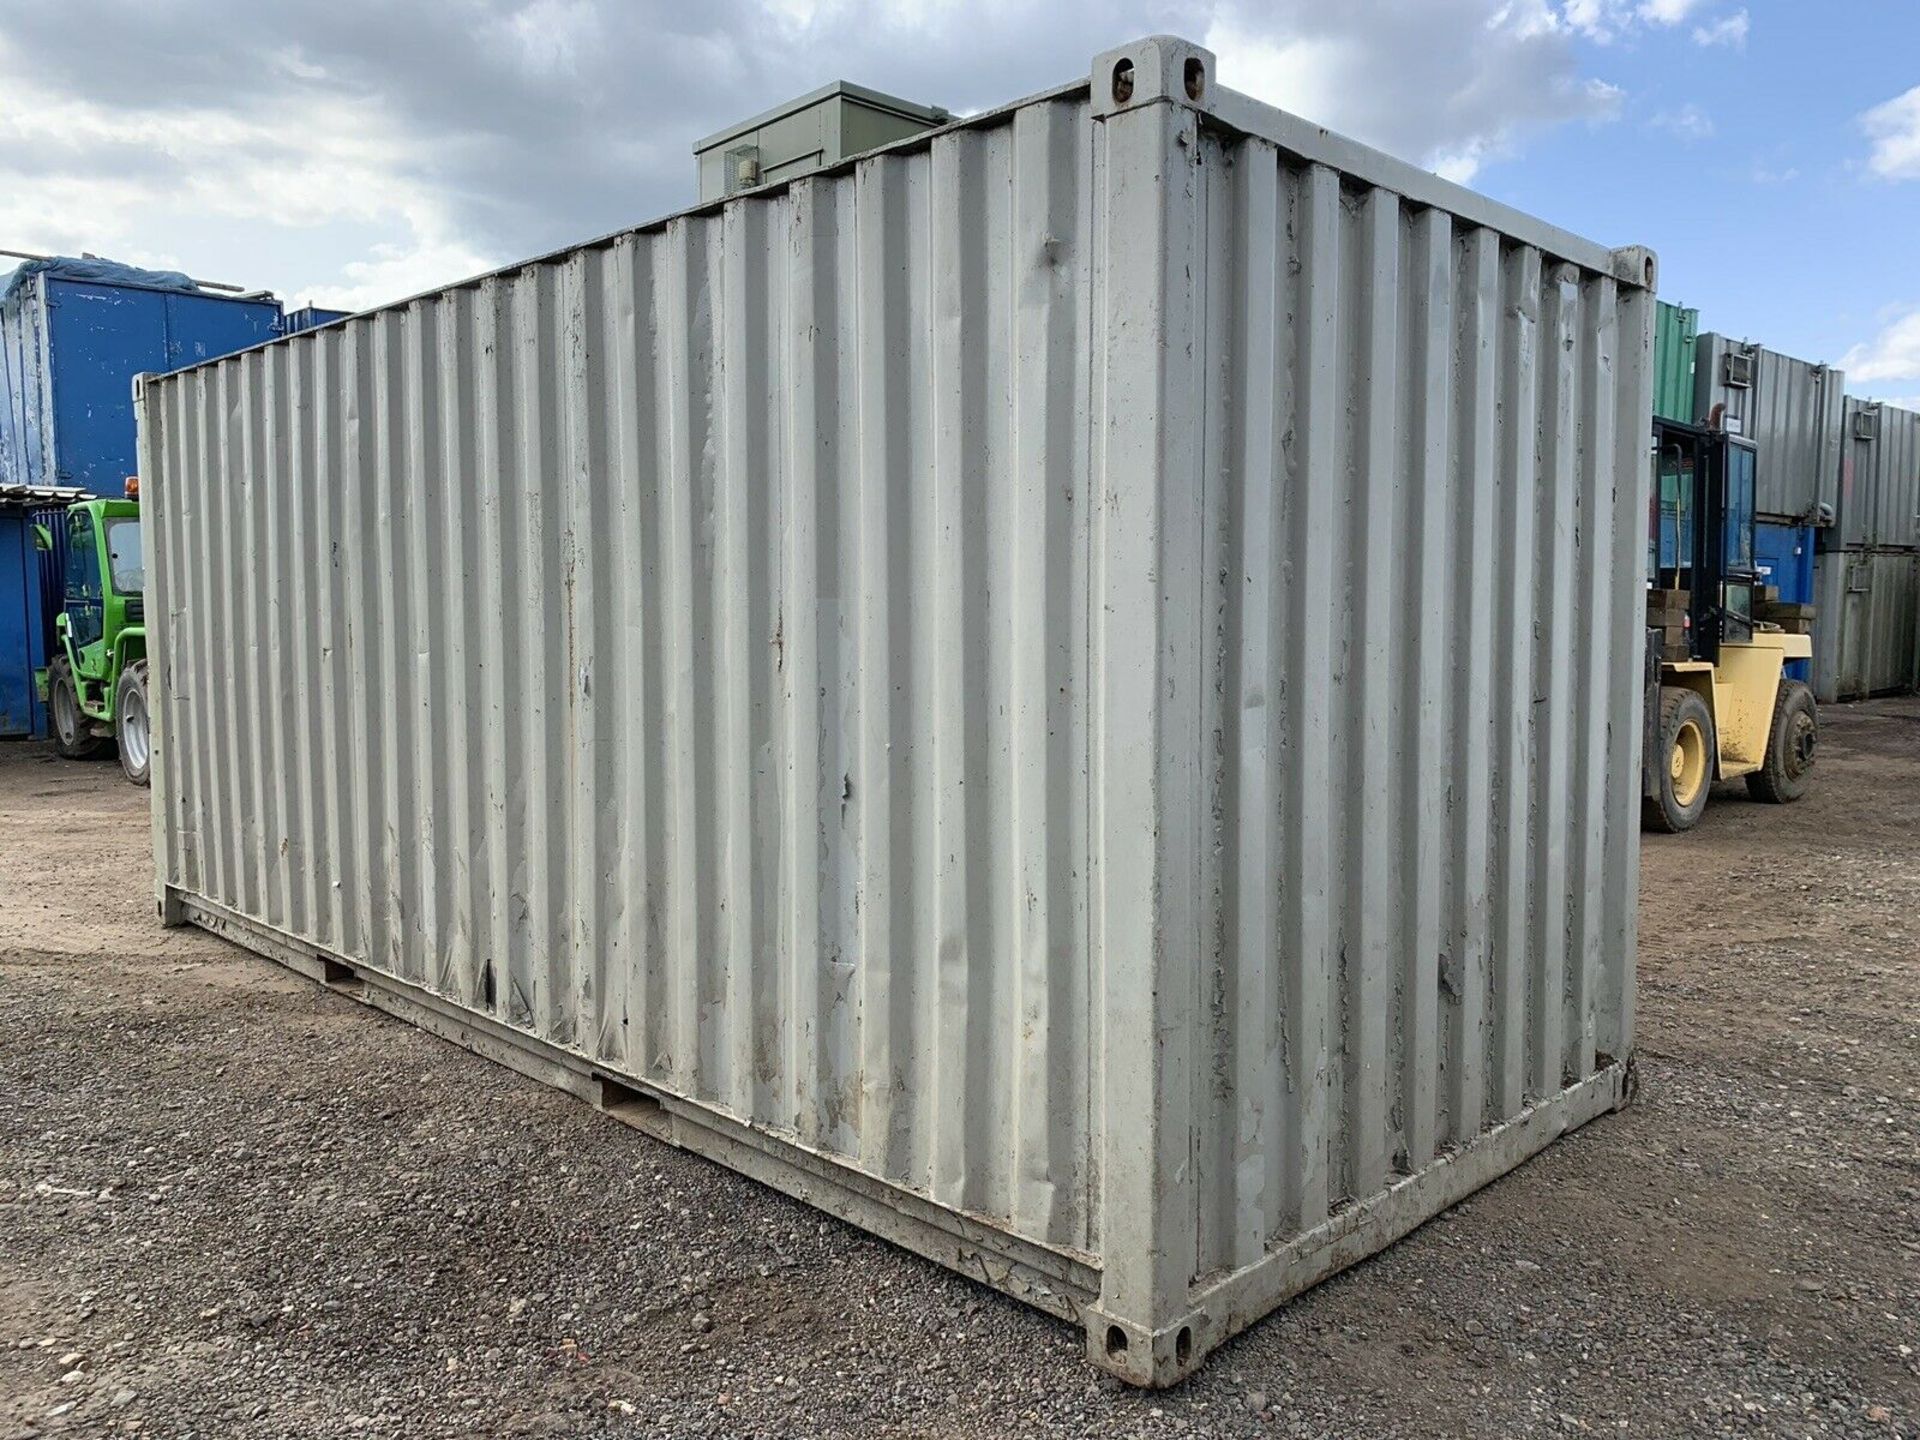 Anti Vandal Steel Portable Storage Container - Image 9 of 10